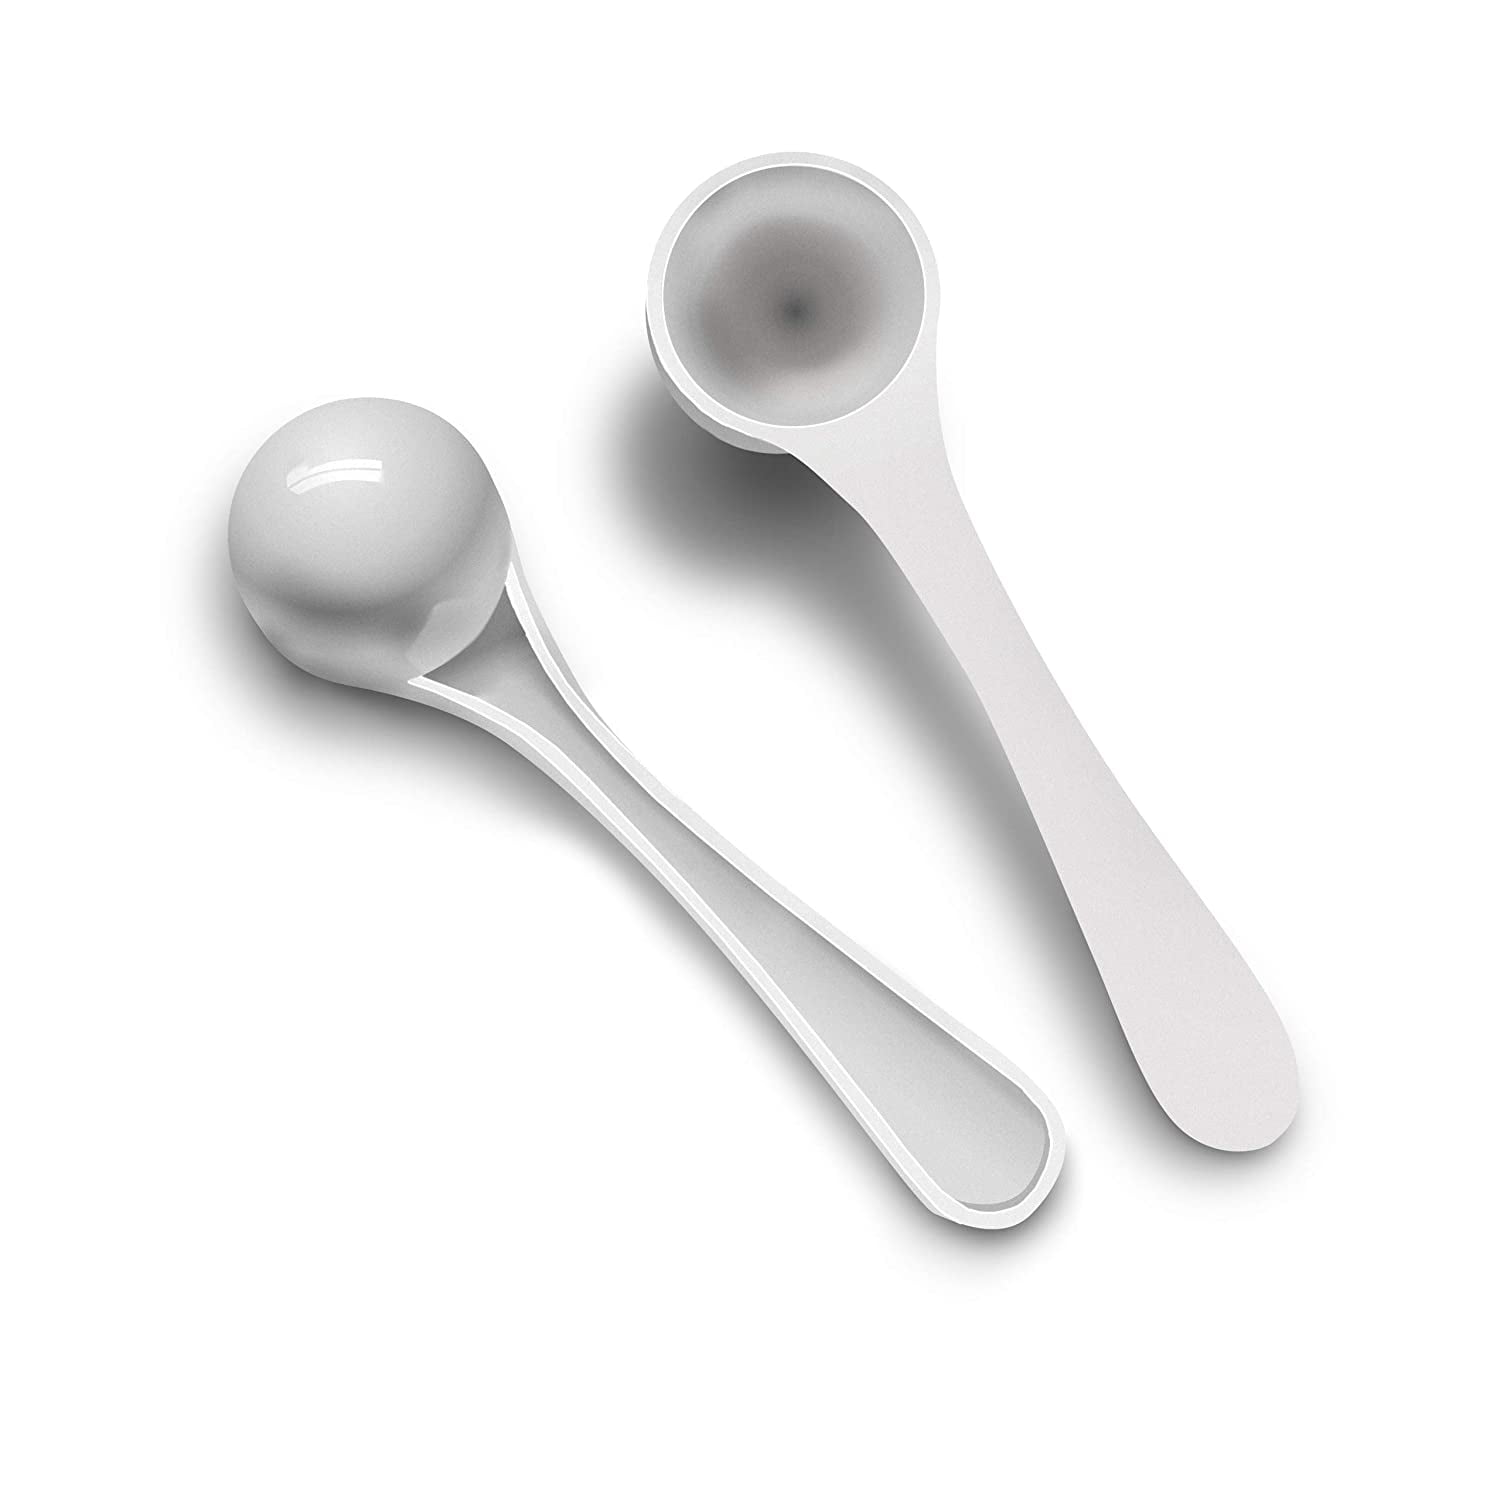 Coffee Scoops / Tablespoon Plastic Measuring Spoons (10-Pack); Ideal for Kitchen & Pantry Storage